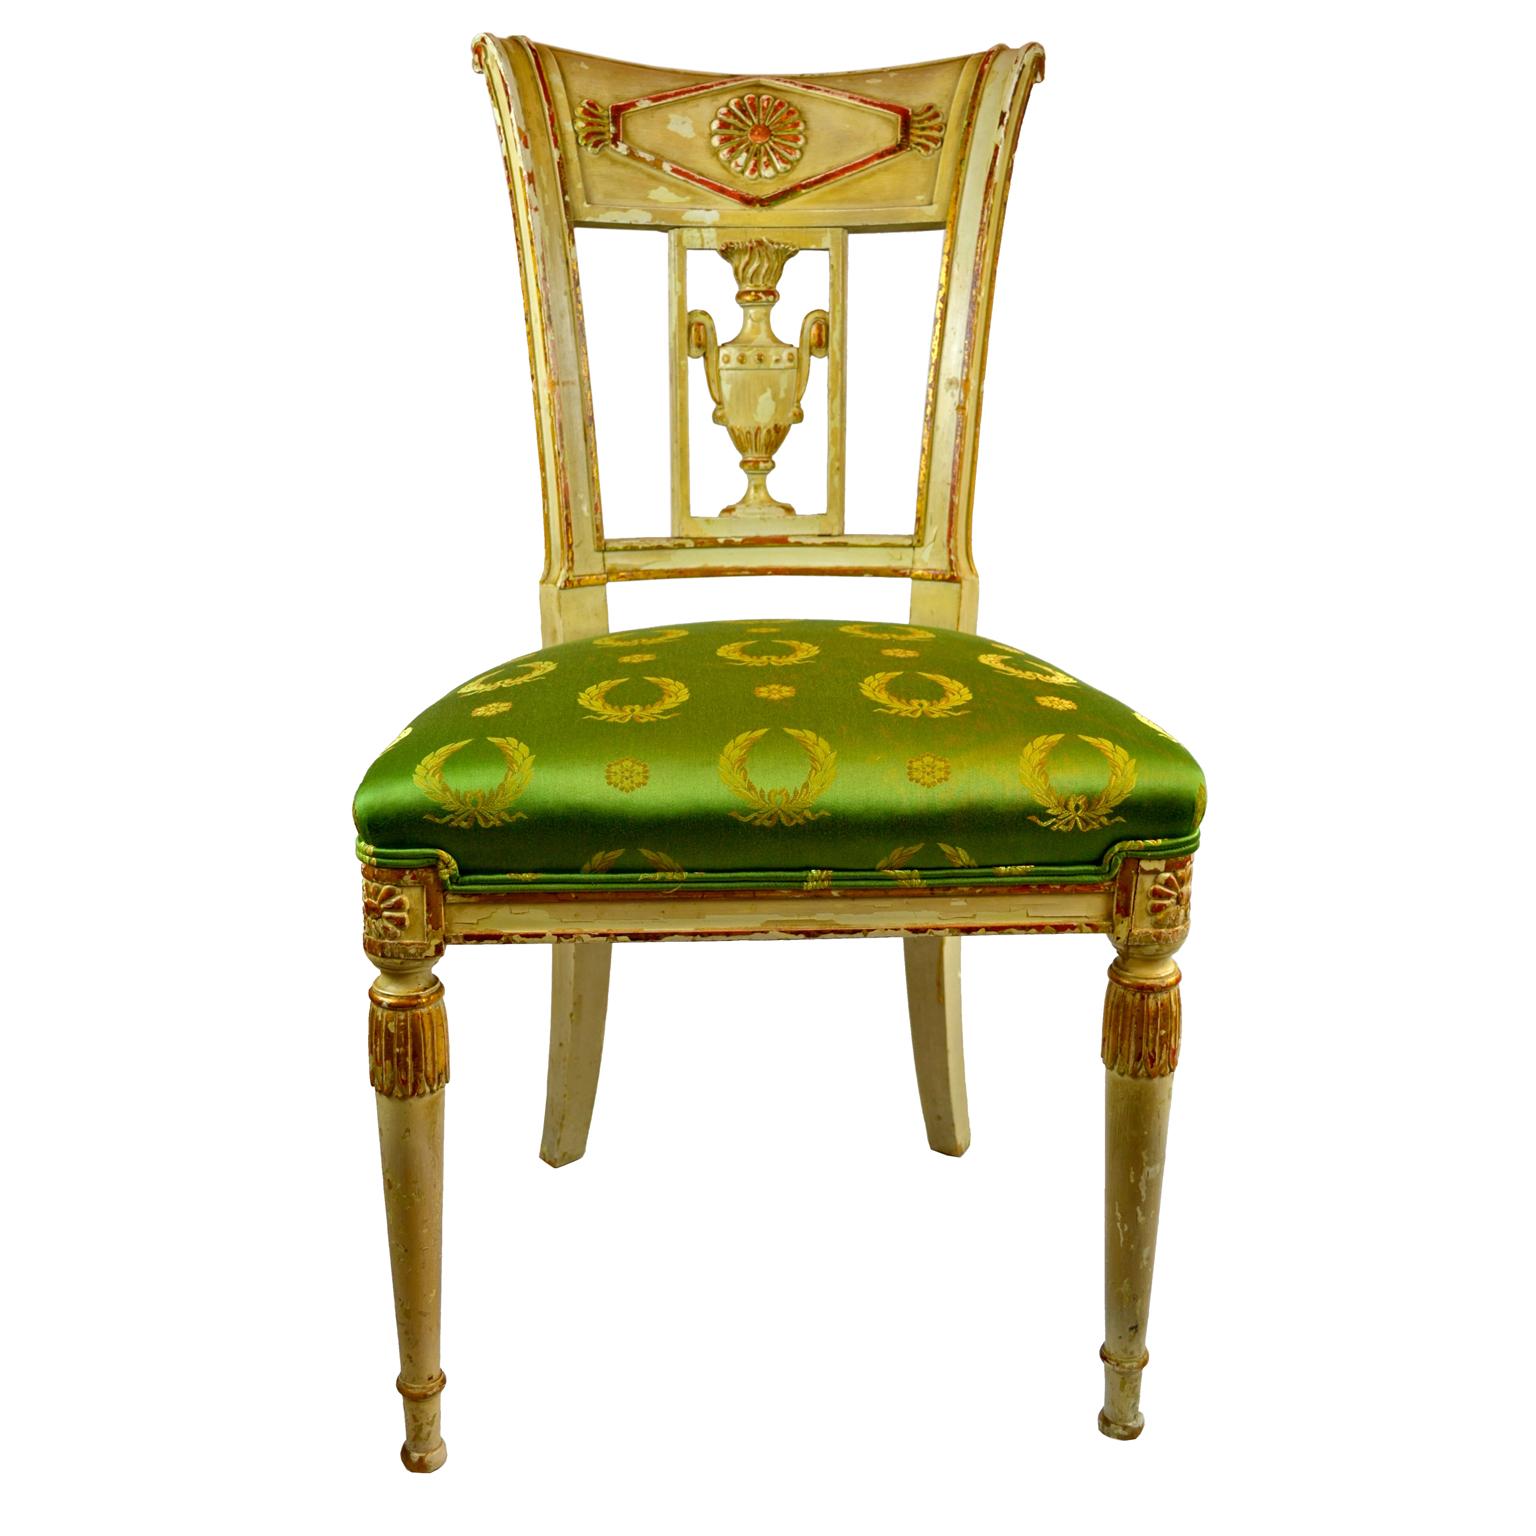 A late 18th century French side chair from the Directoire Period with a carved and parcel gilt cream painted frame. The backsplat with a carved classical urn. Upholstered in green Empire silk fabric.